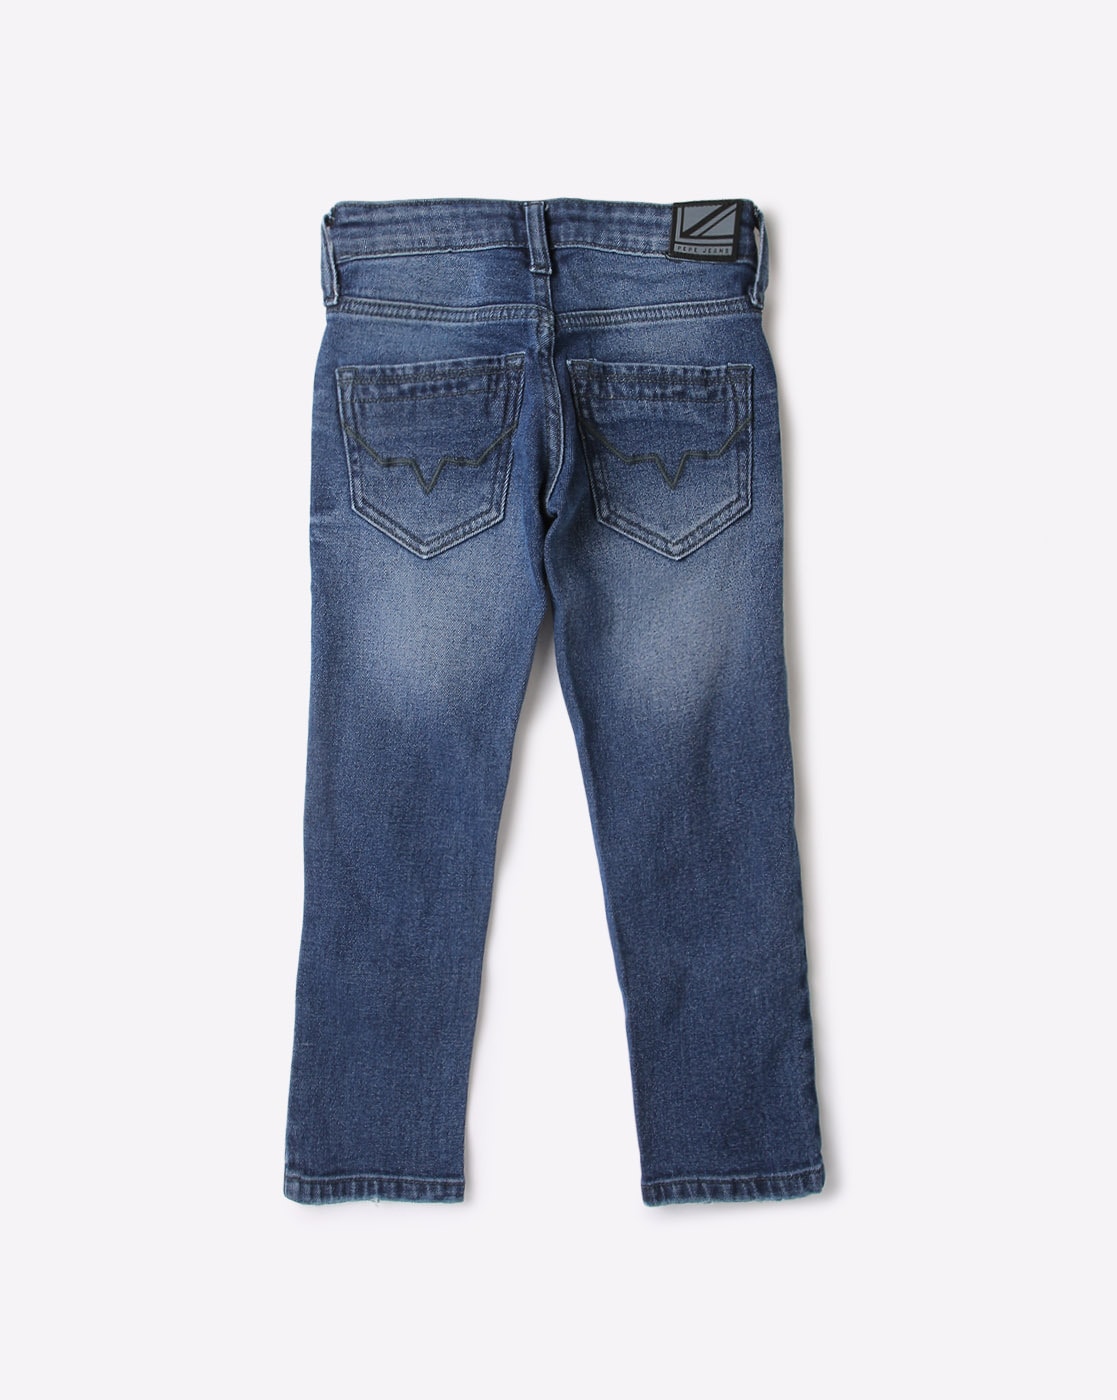 Buy Blue Jeans by Pepe Jeans | Ajio.com